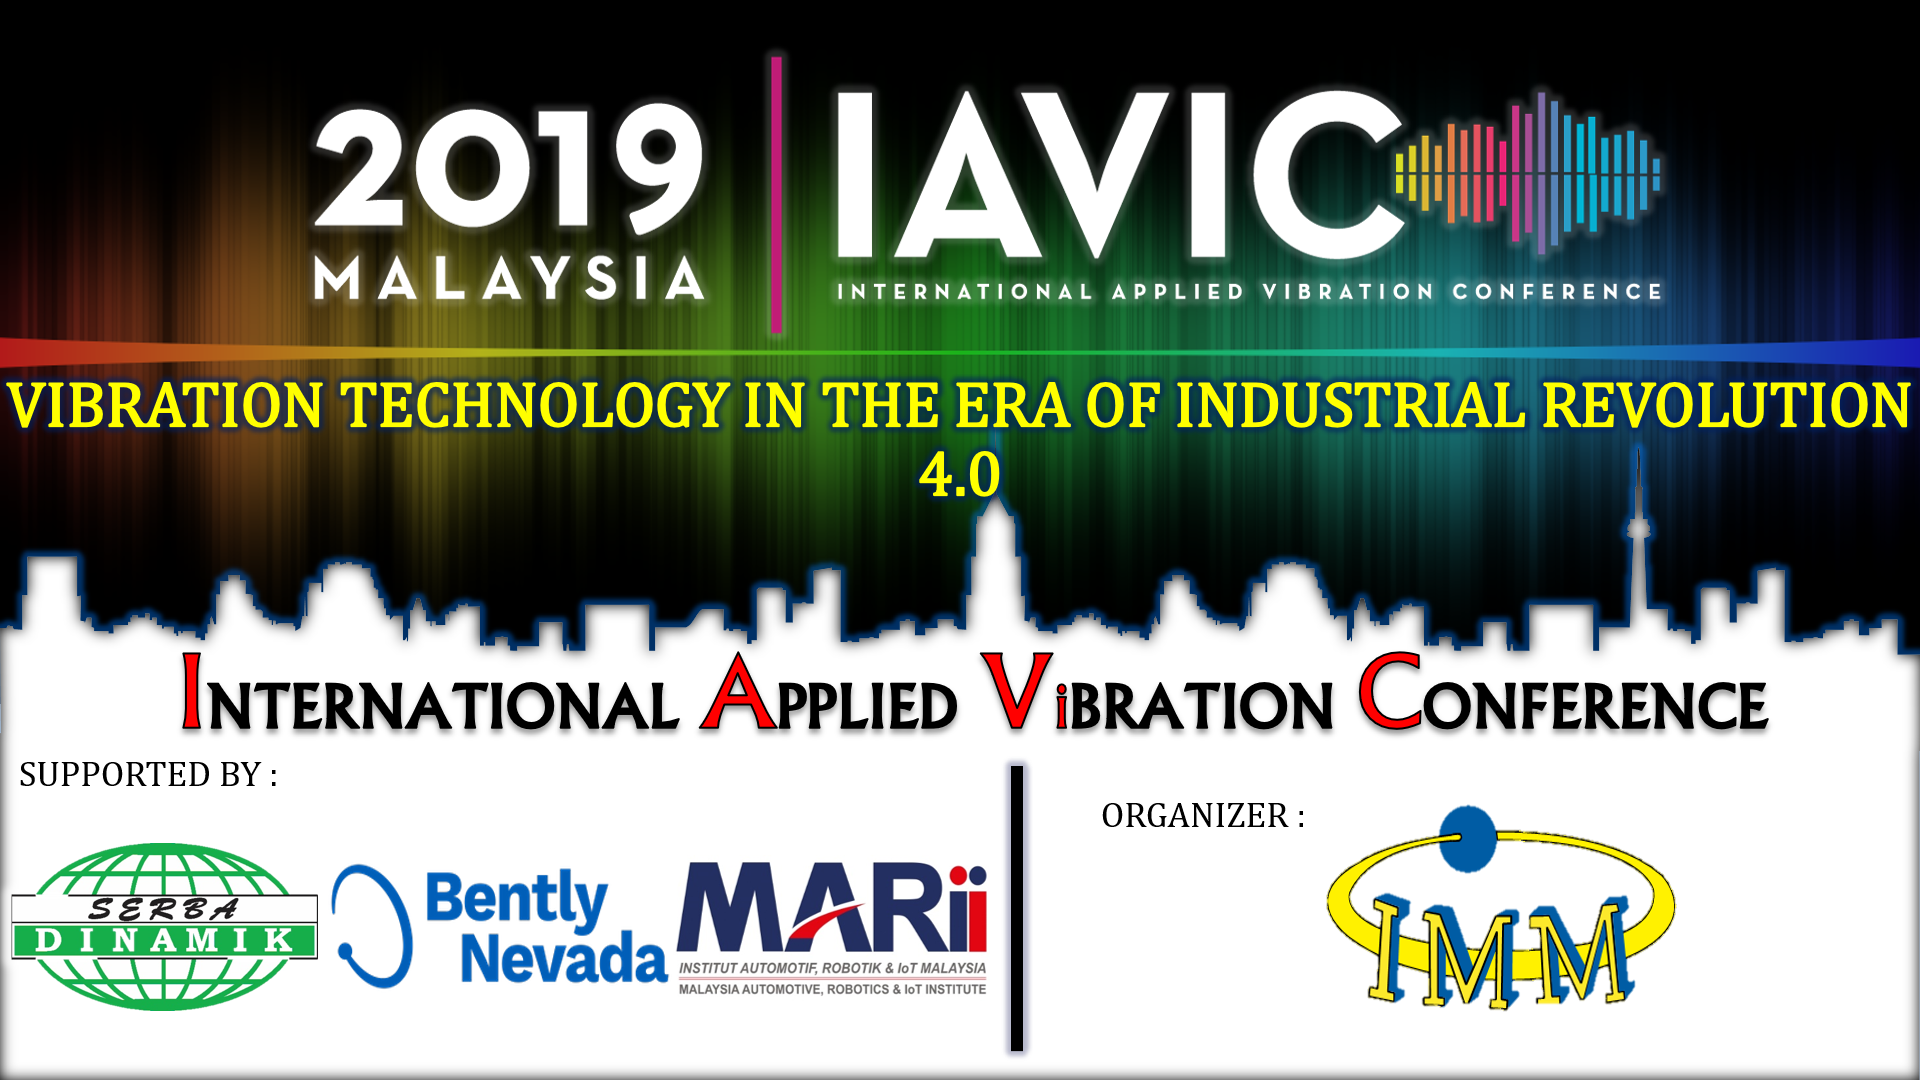 International Applied Vibration Conference (IAViC) 2019 On 13th and 14th November in Kuala Lumpur